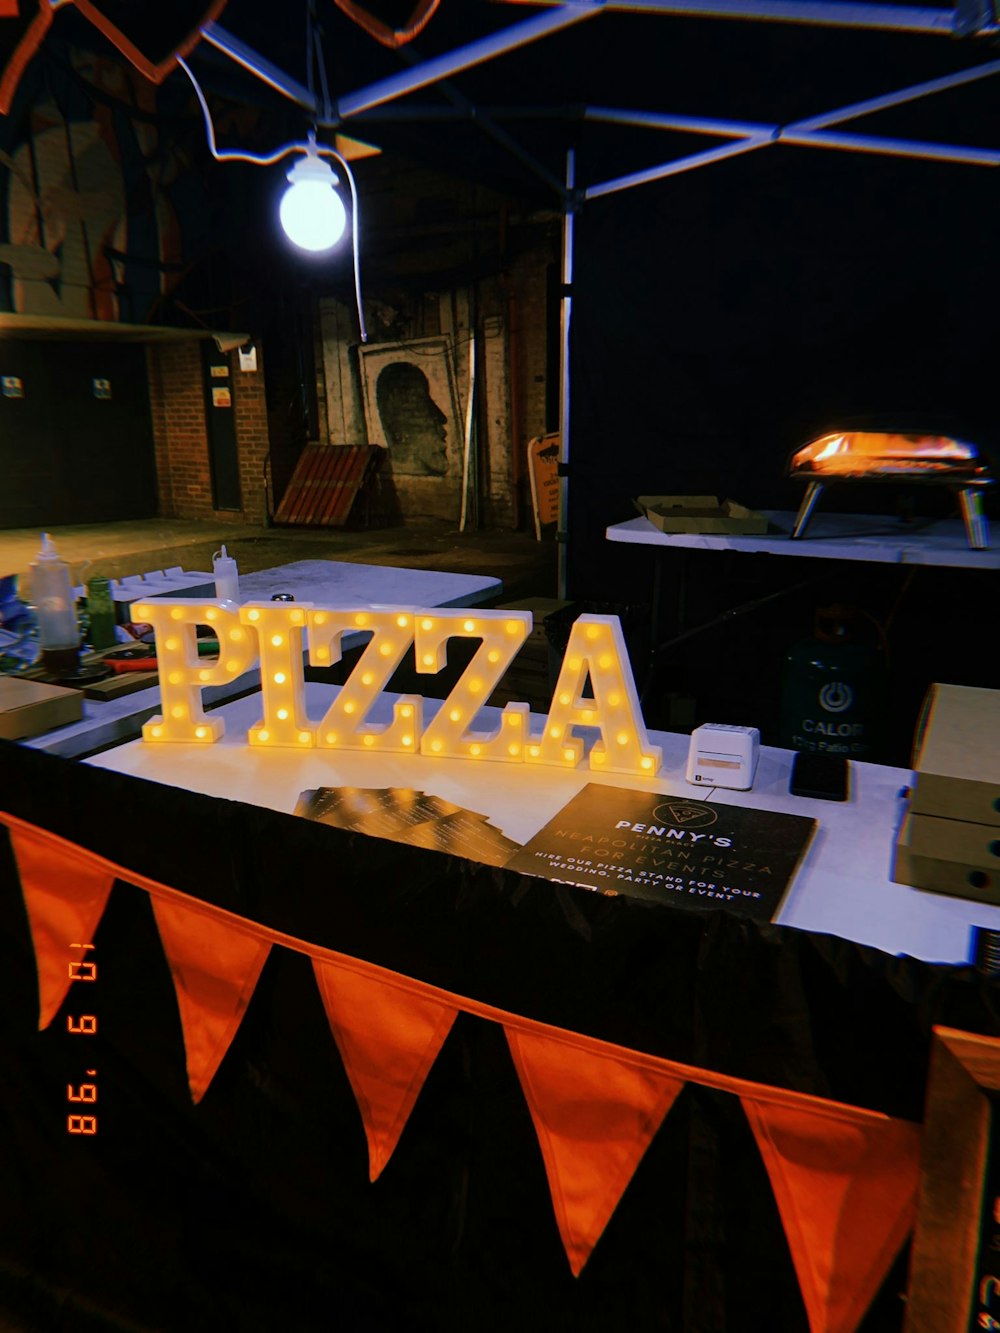 Hero image for supplier Penny's Pizza